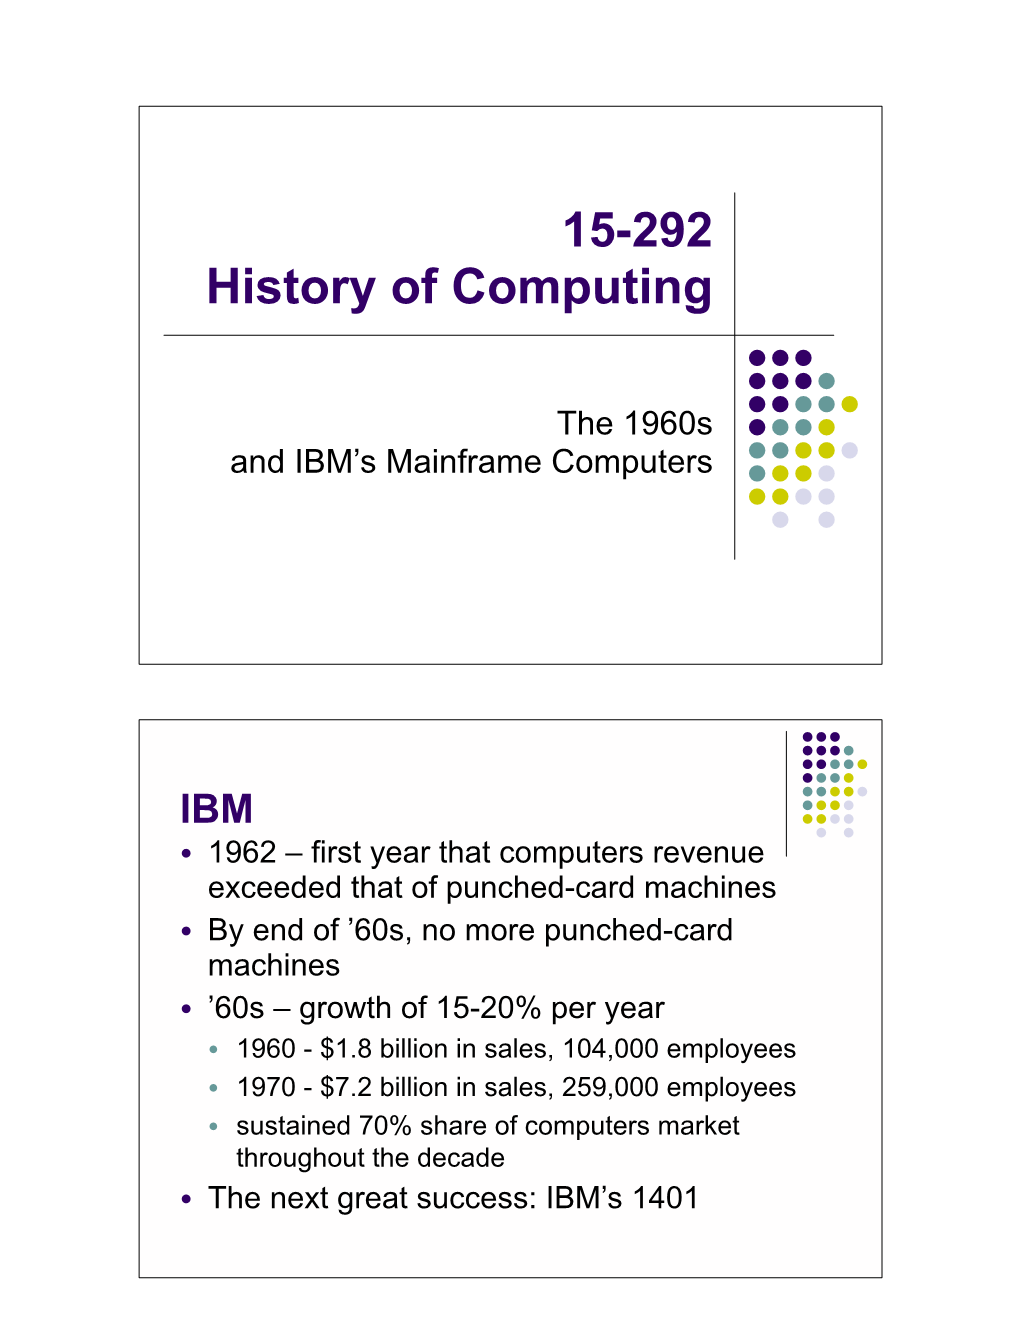 The 1960S and IBM's Mainframe Computers